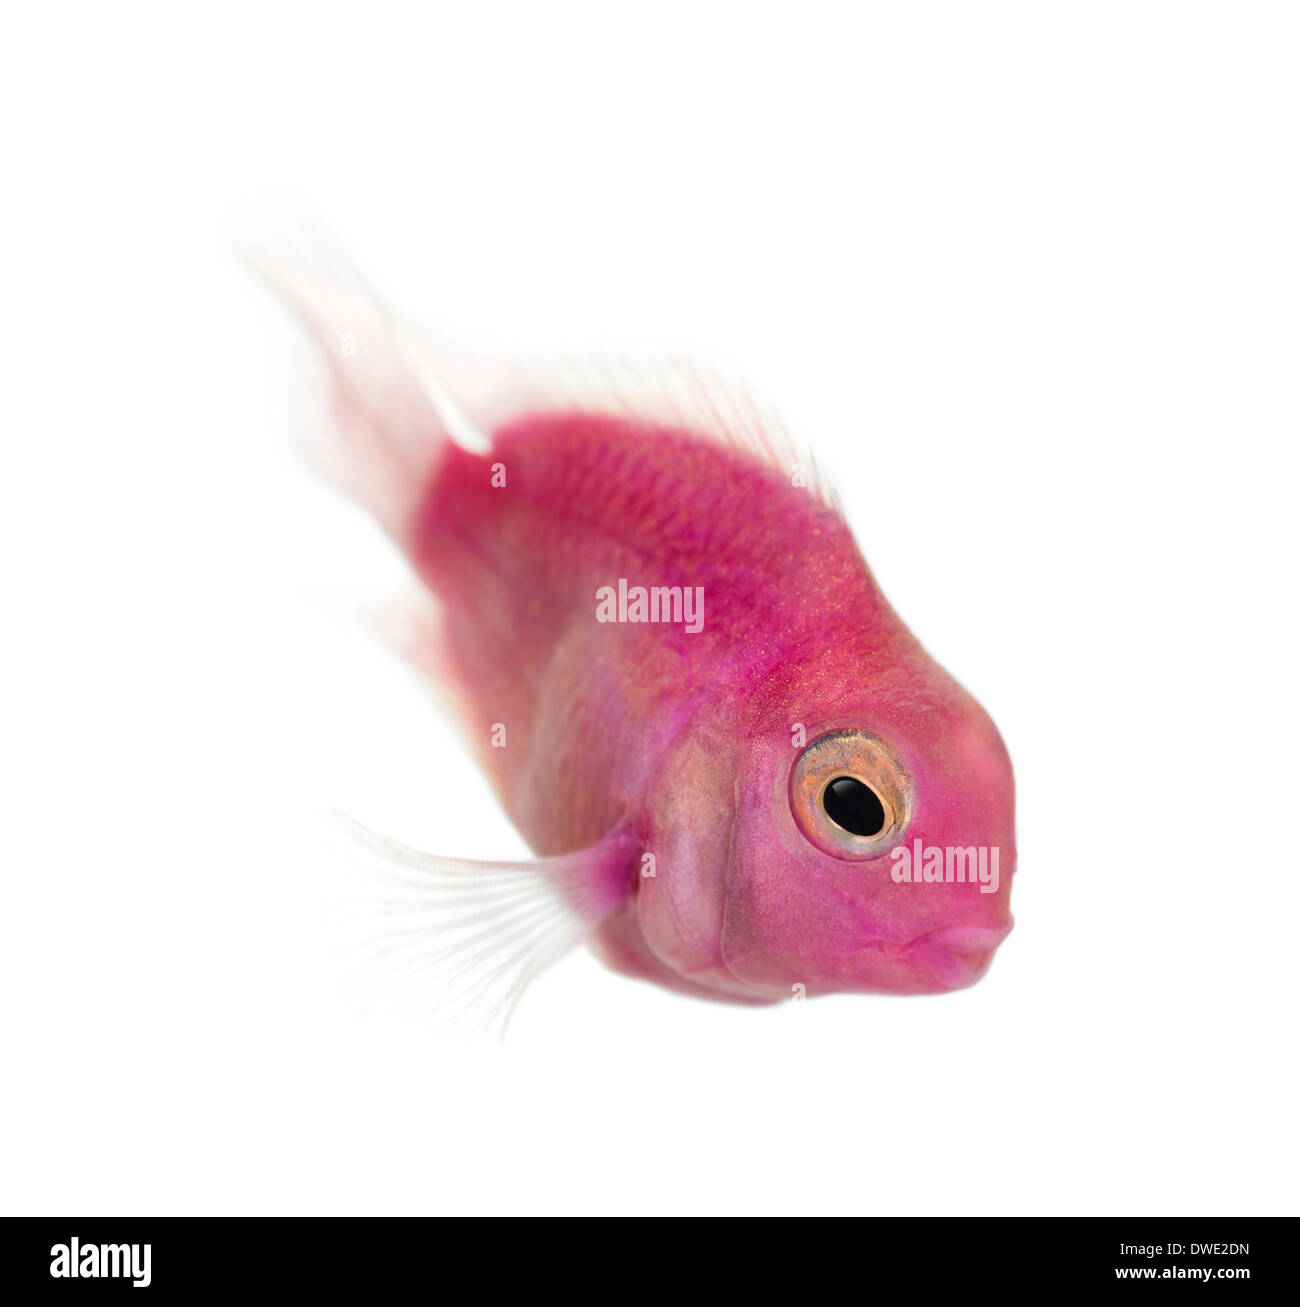 Side view of a pink freshwater fish swimming against white background Stock Photo